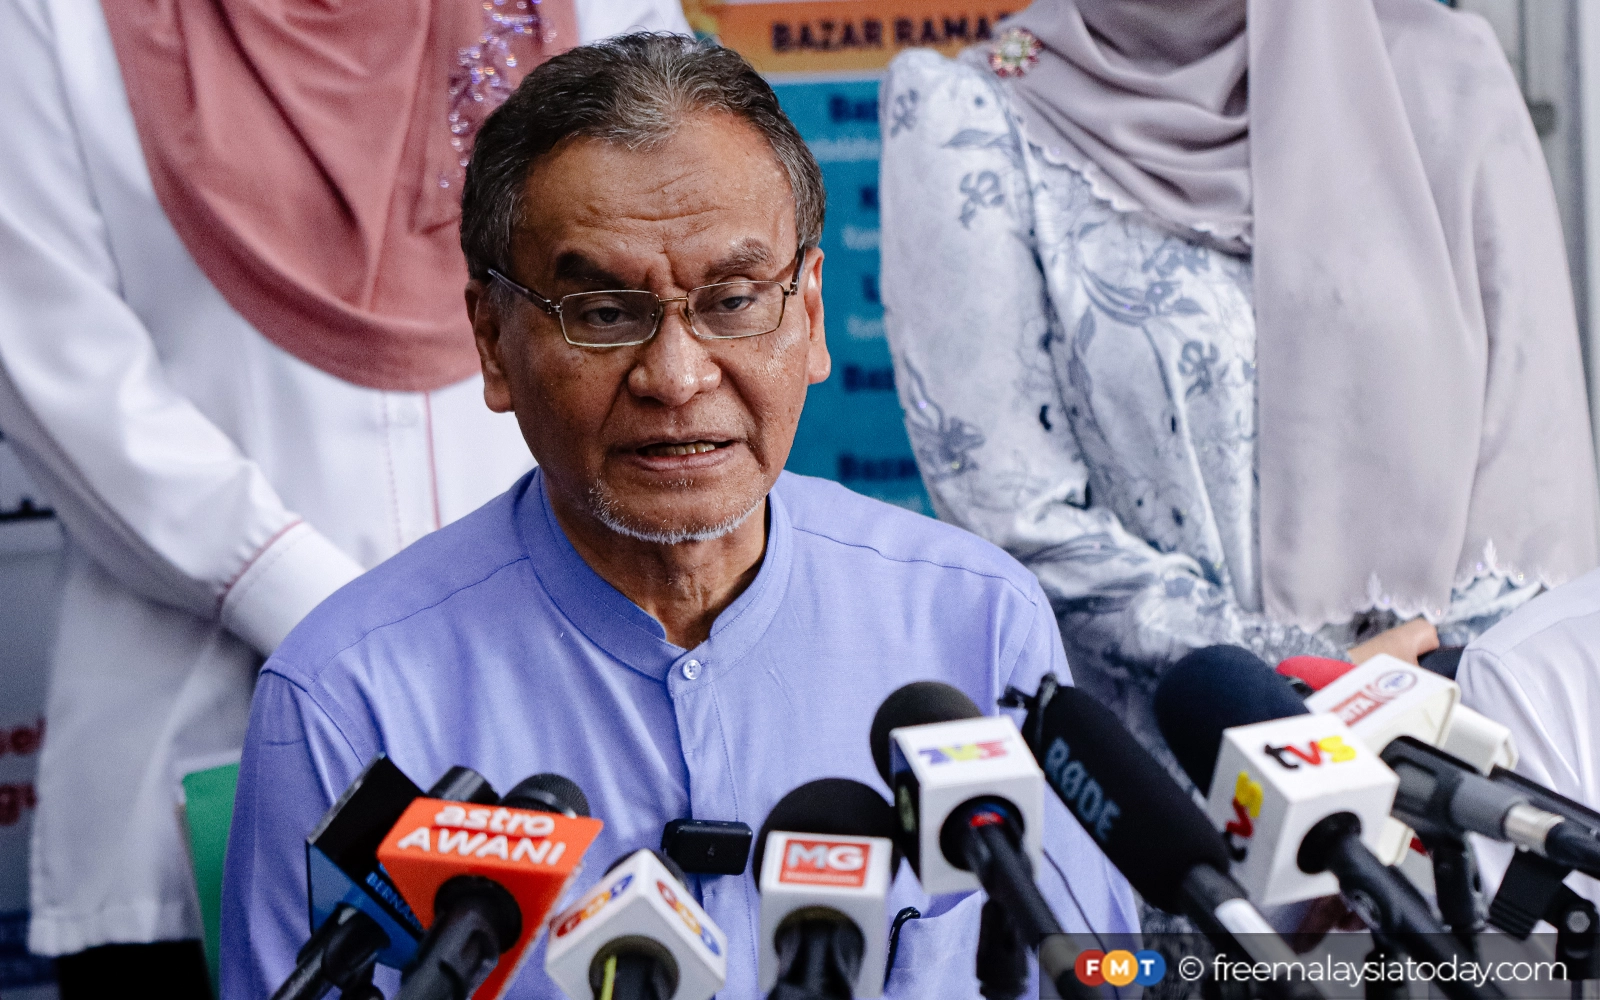 Health ministry to go ahead with amending Medical Act